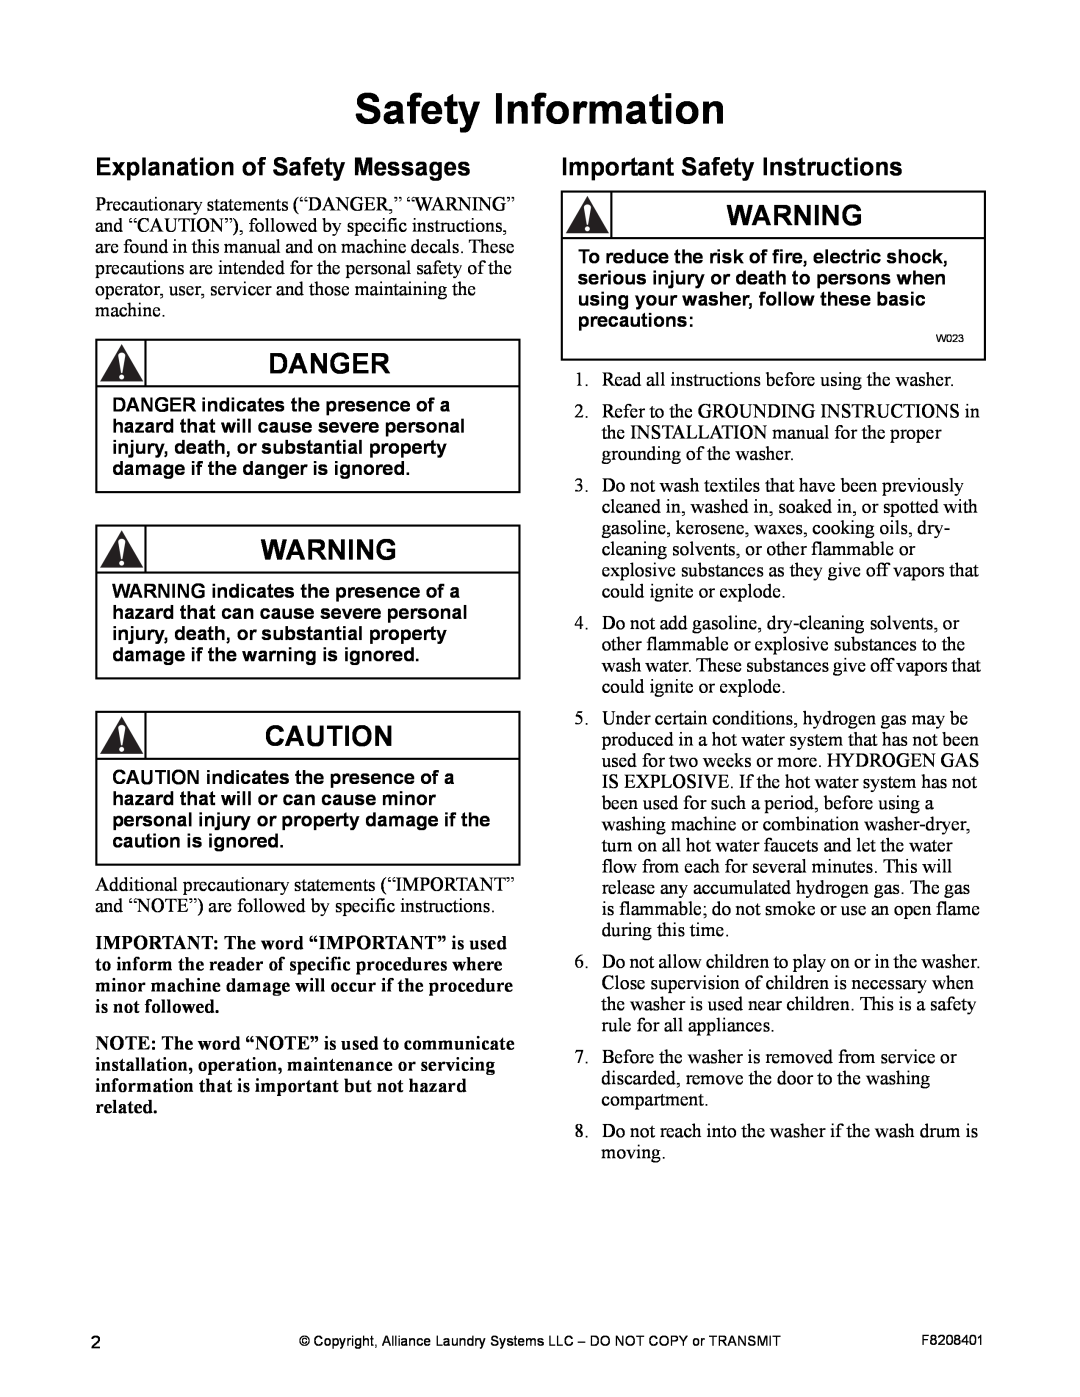 Alliance Laundry Systems CHM1772C manual Safety Information, Explanation of Safety Messages, Important Safety Instructions 